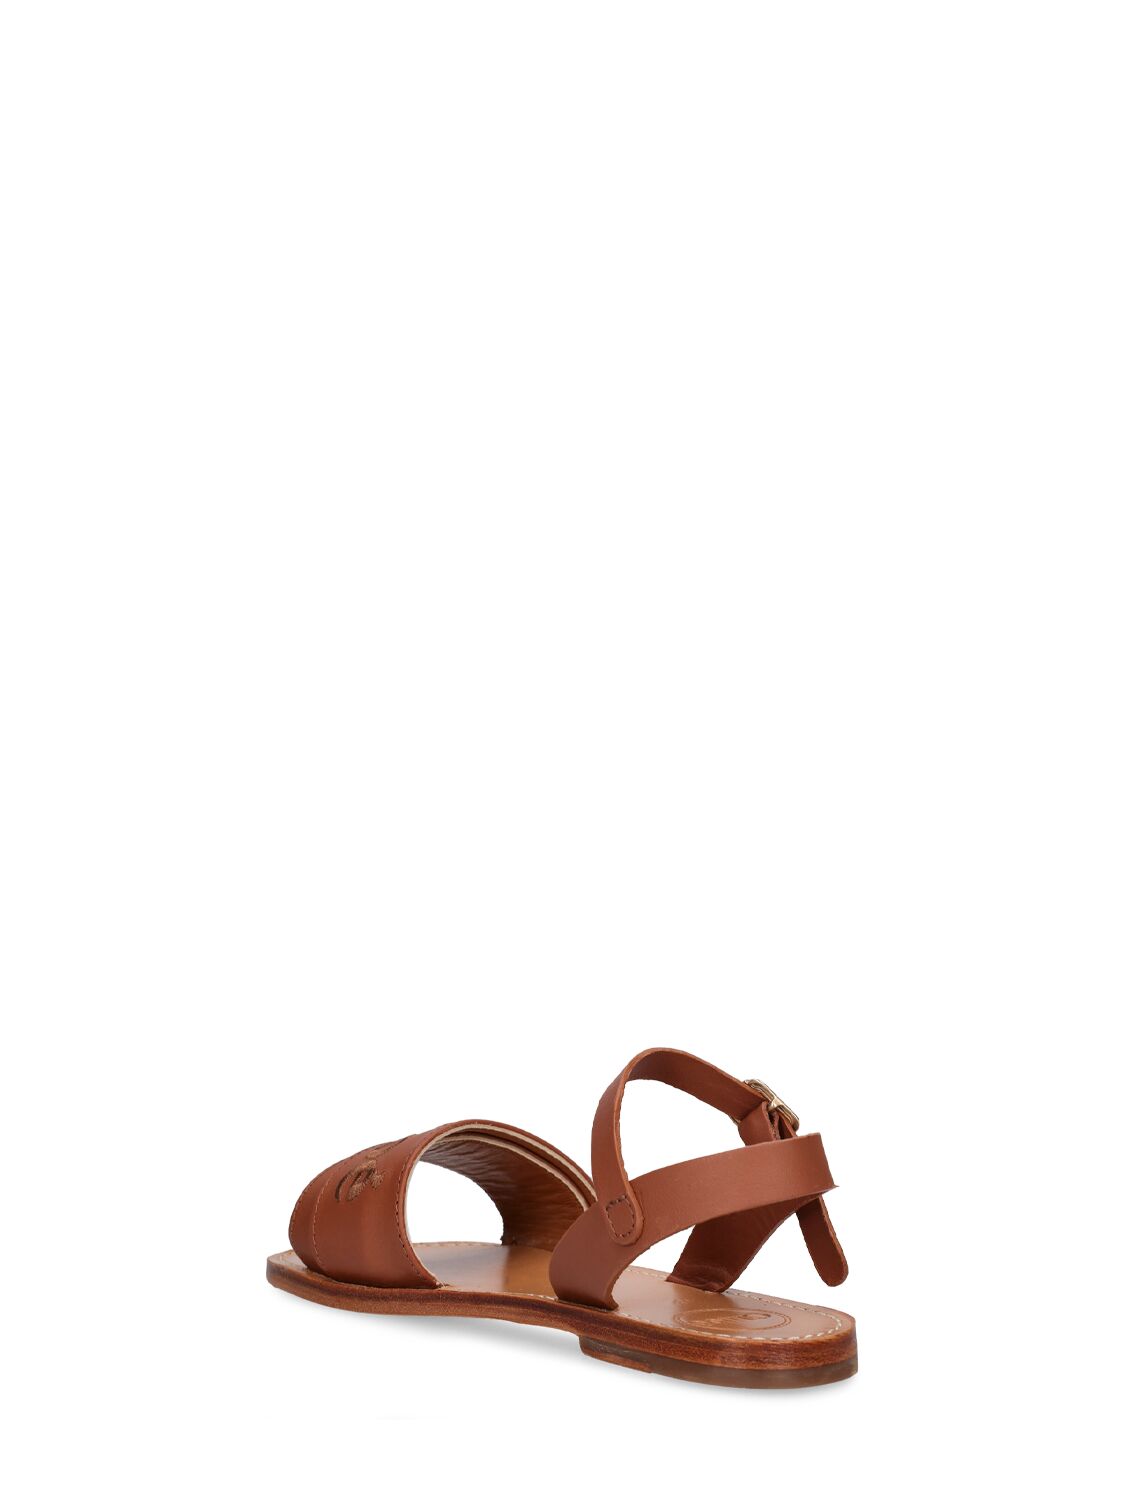 Shop Chloé Leather Sandals W/logo In Brown